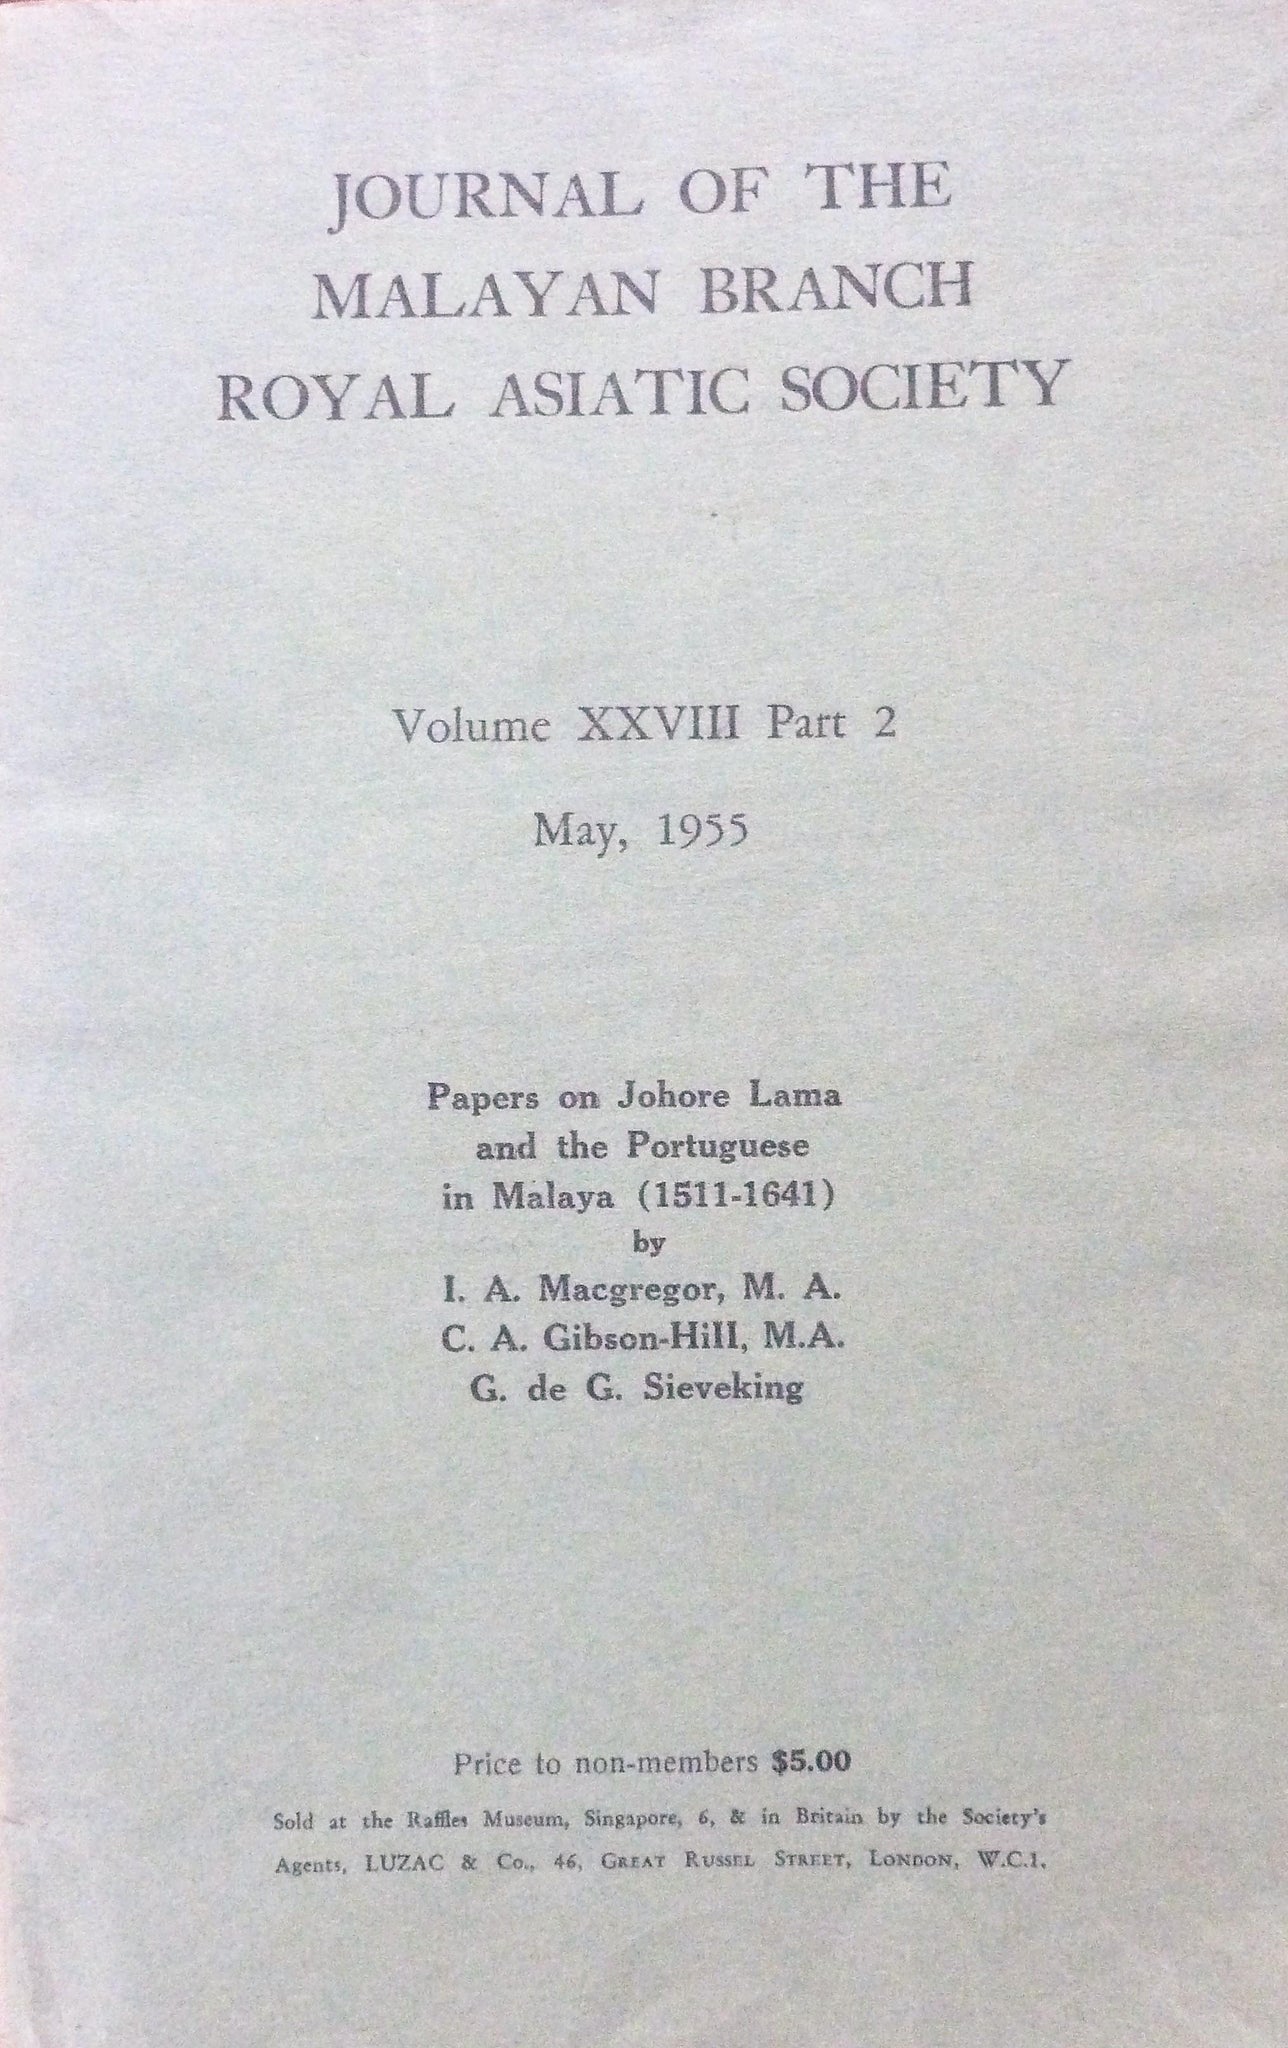 Papers on Johore Lama and the Portuguese on Malaya